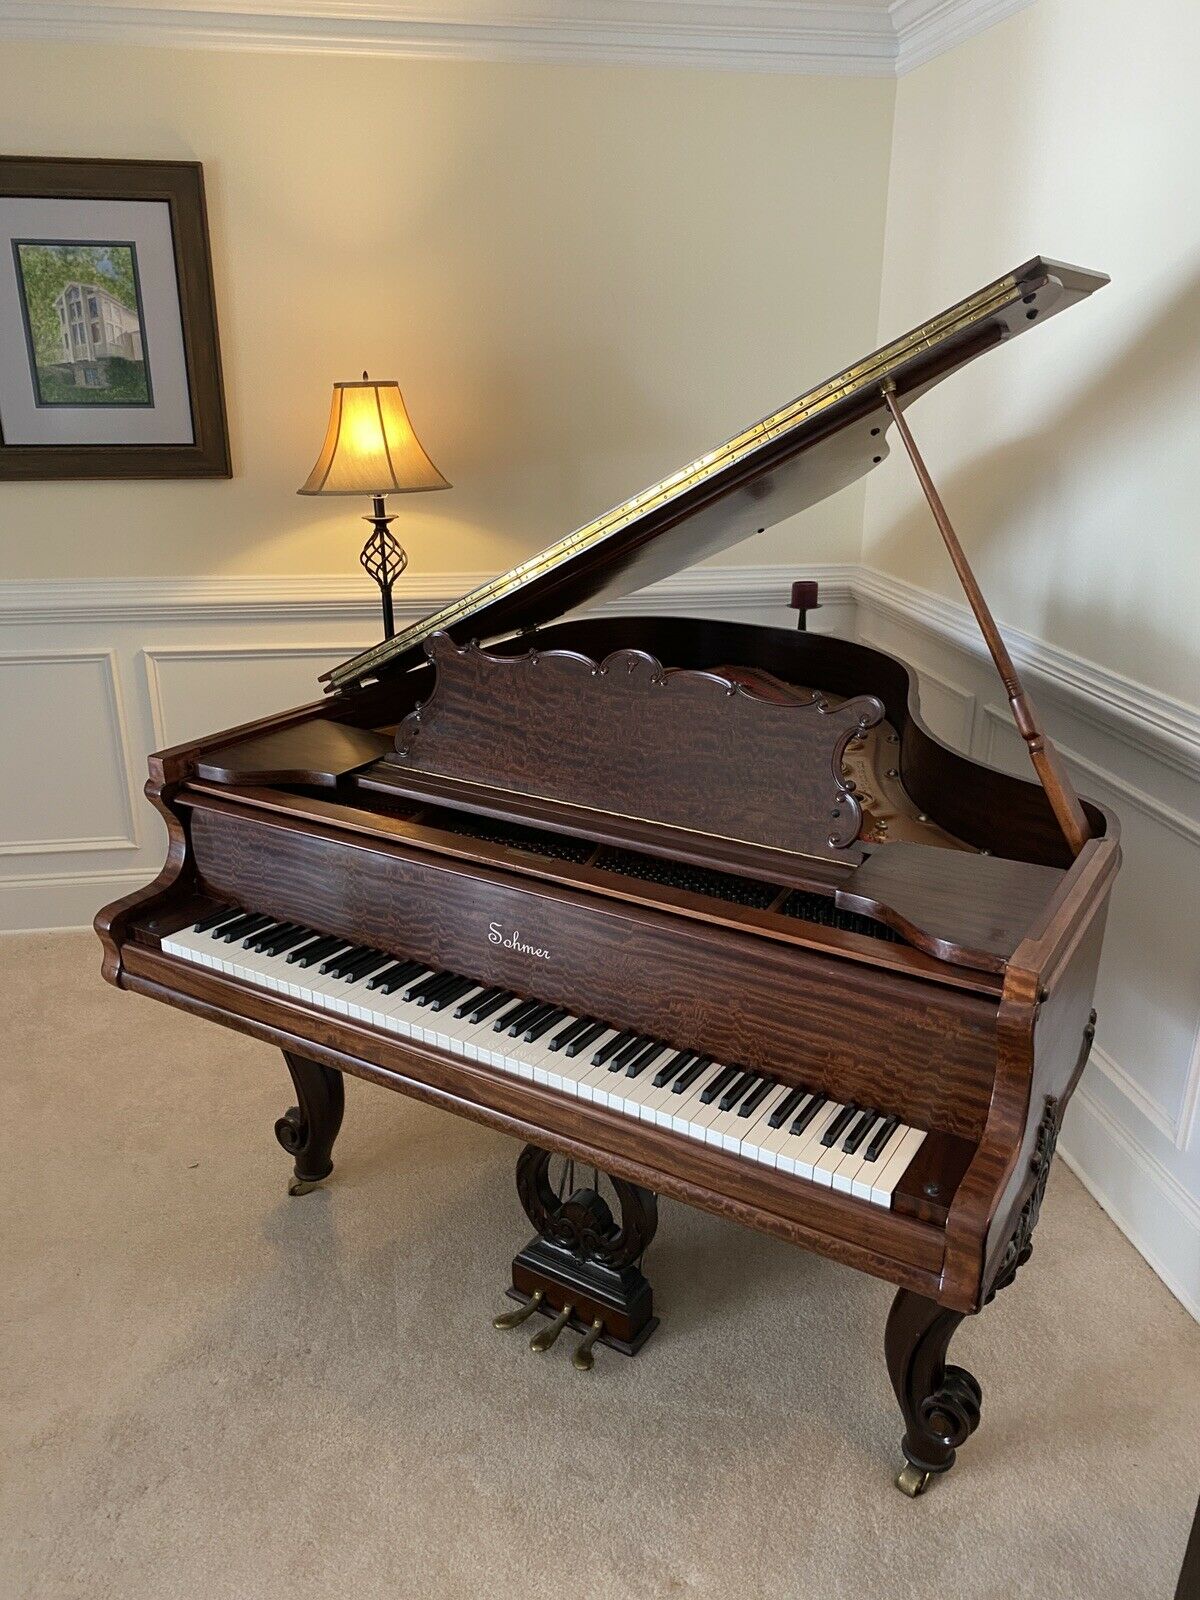 This piano needs a new home 